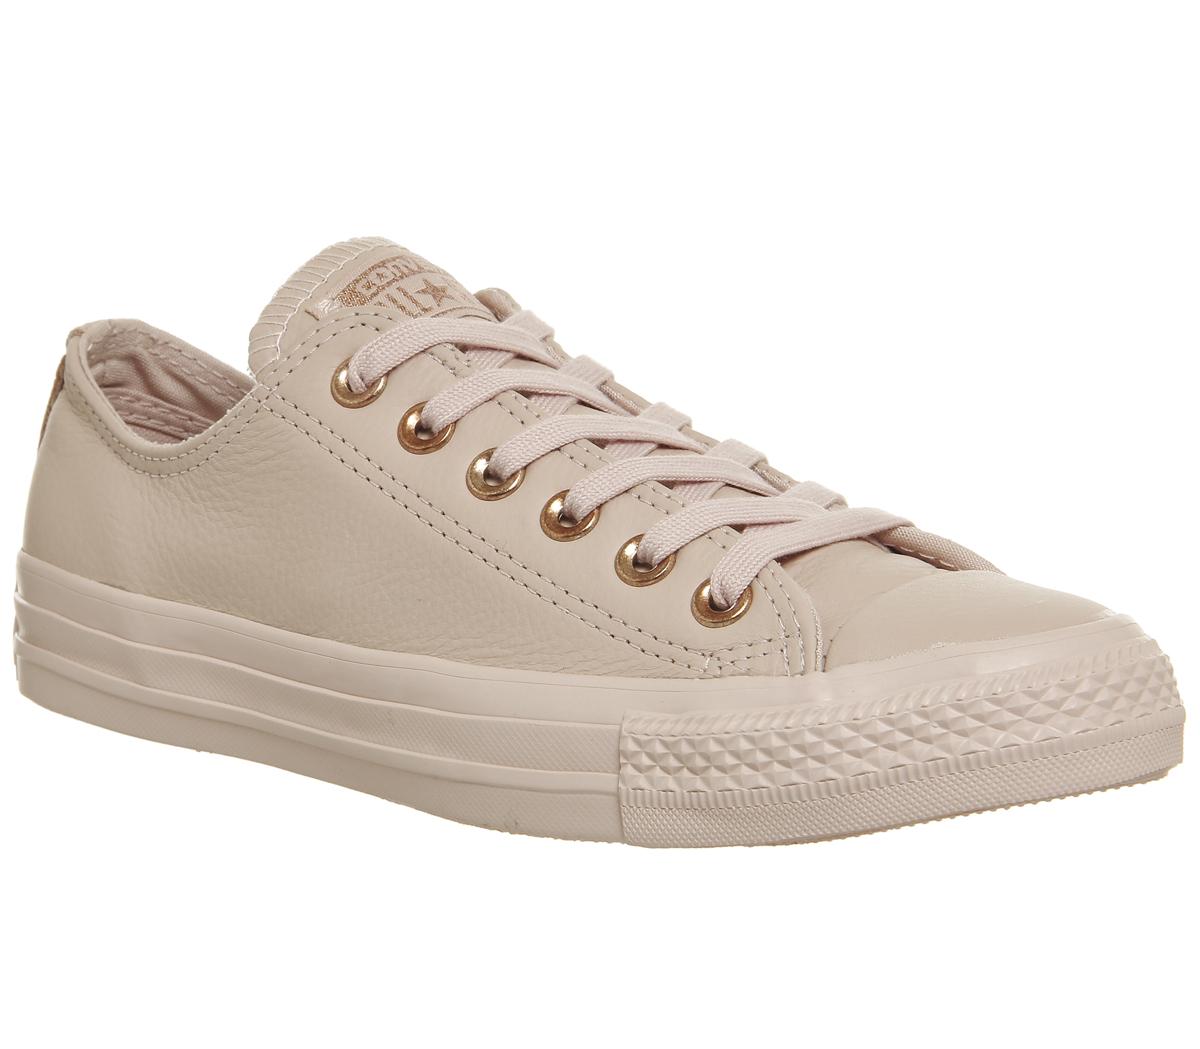 Converse All Star Low Leather Dusk Pink 